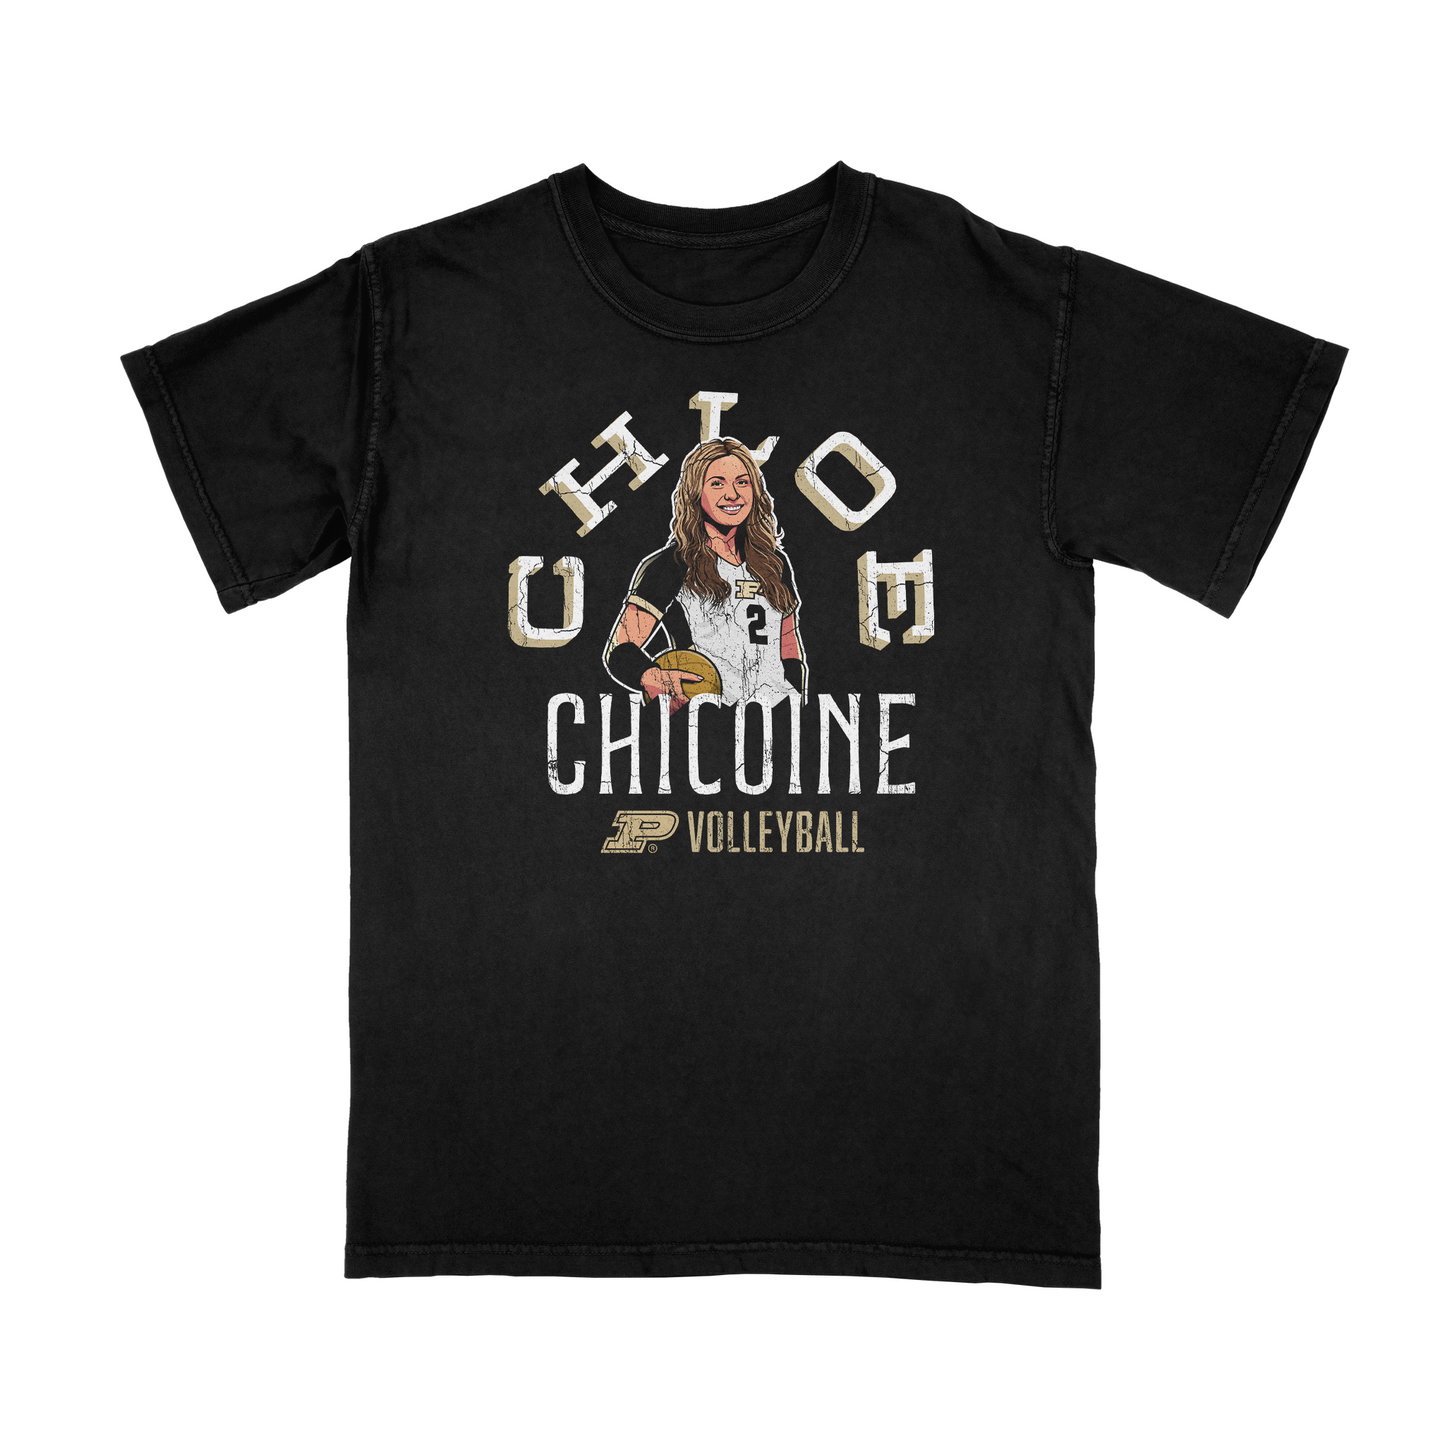 LIMITED RELEASE - Chloe Chicoine Tee